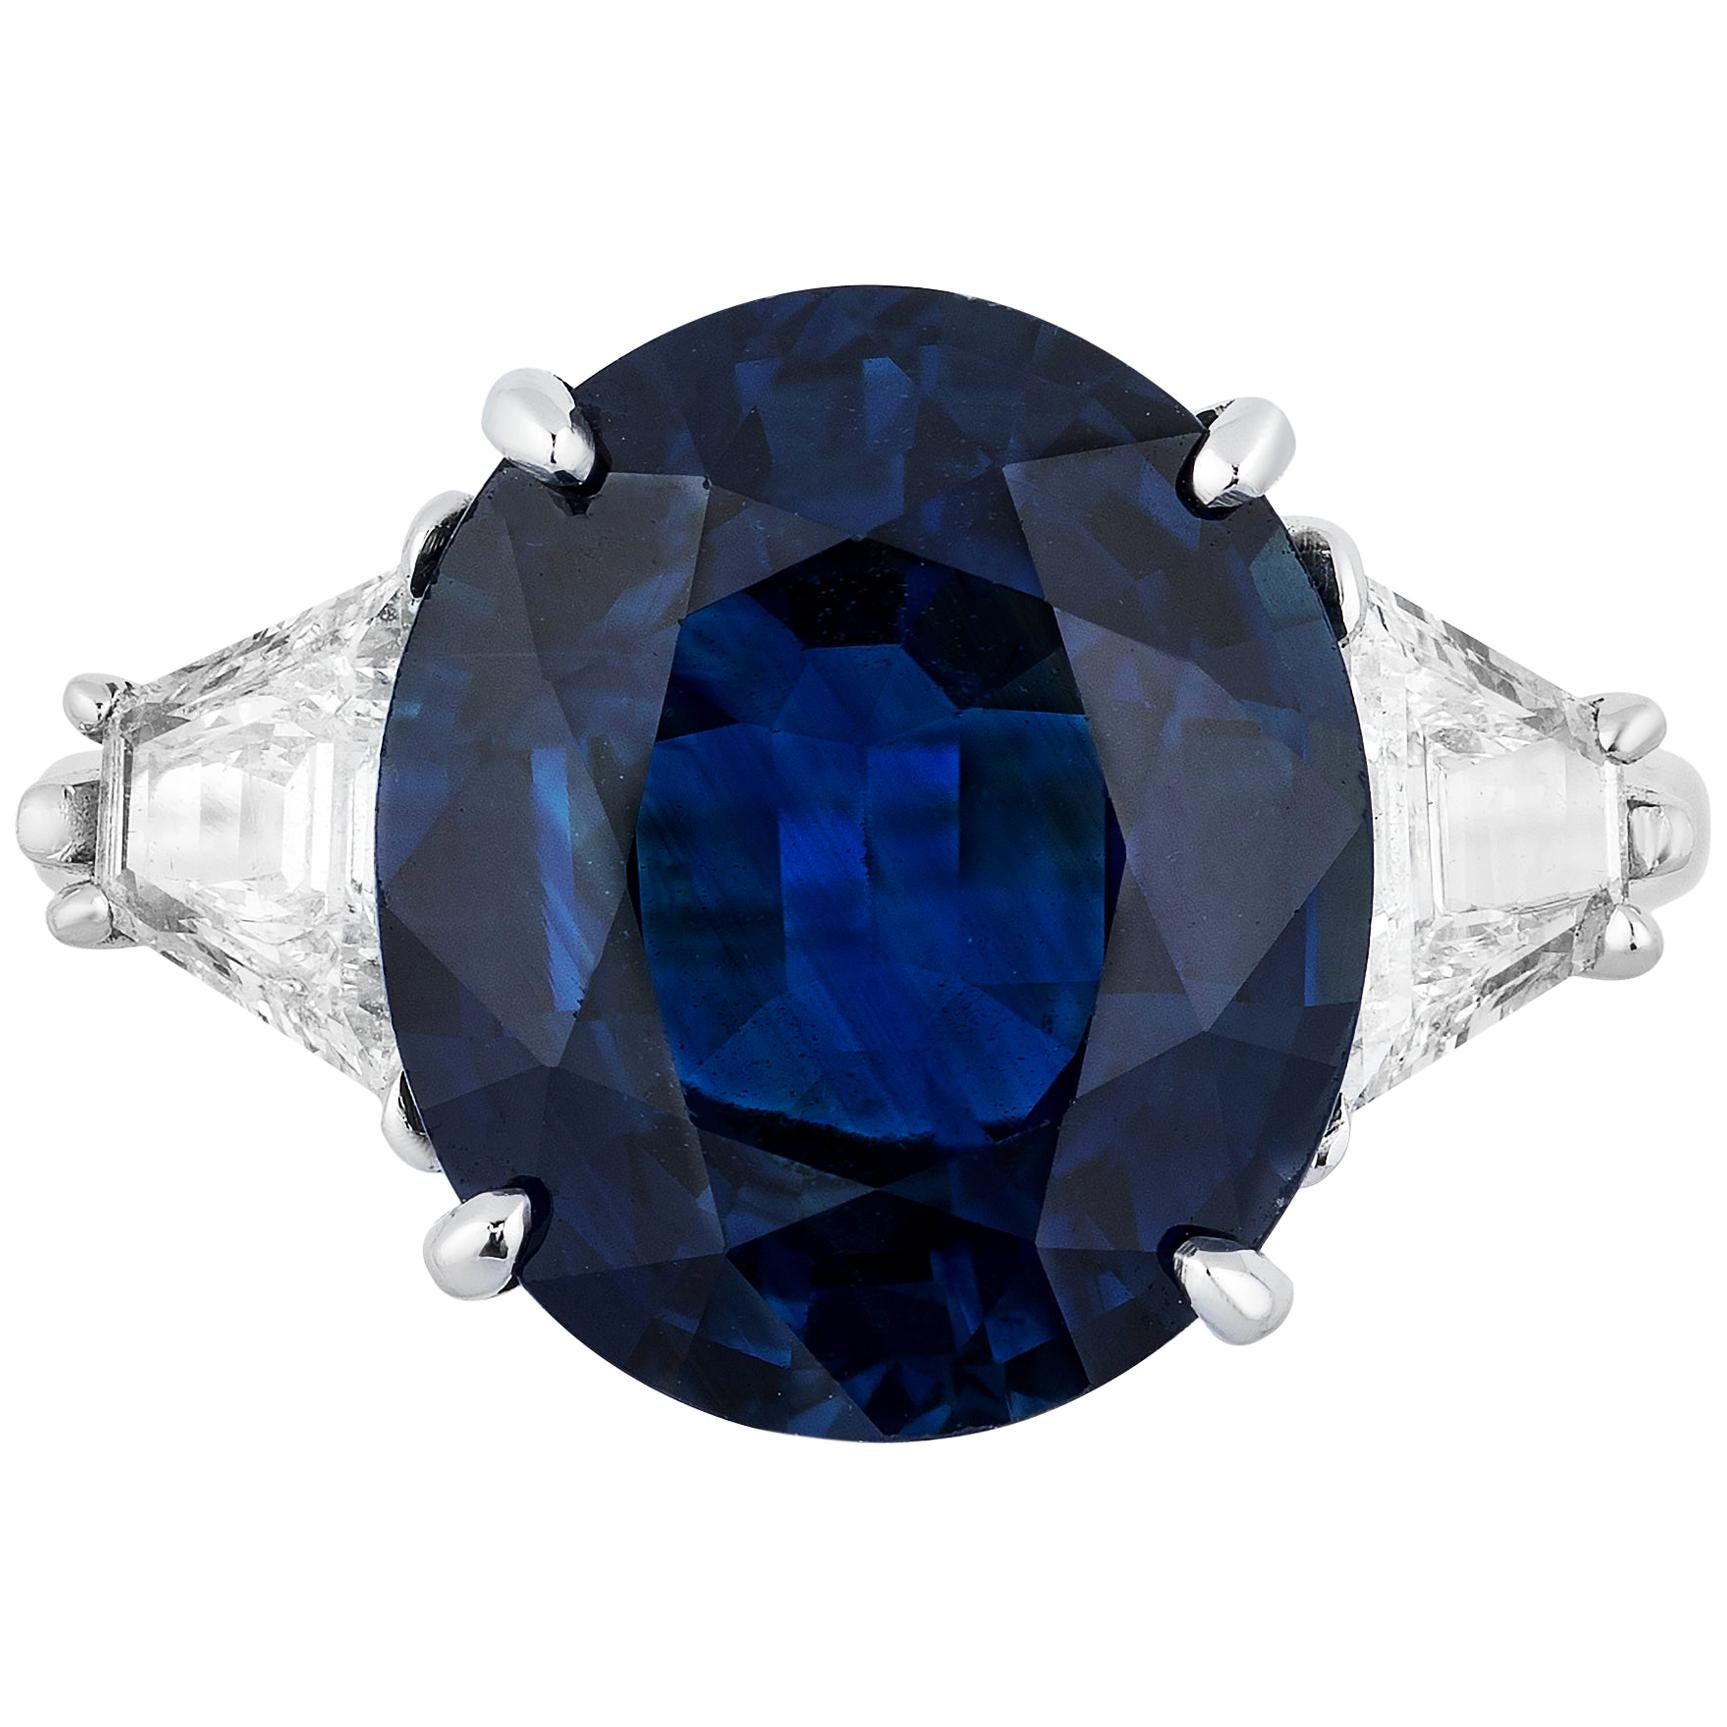 Andreoli 9.38 Carat Blue Sapphire CDC Certified Engagement Ring Platinum